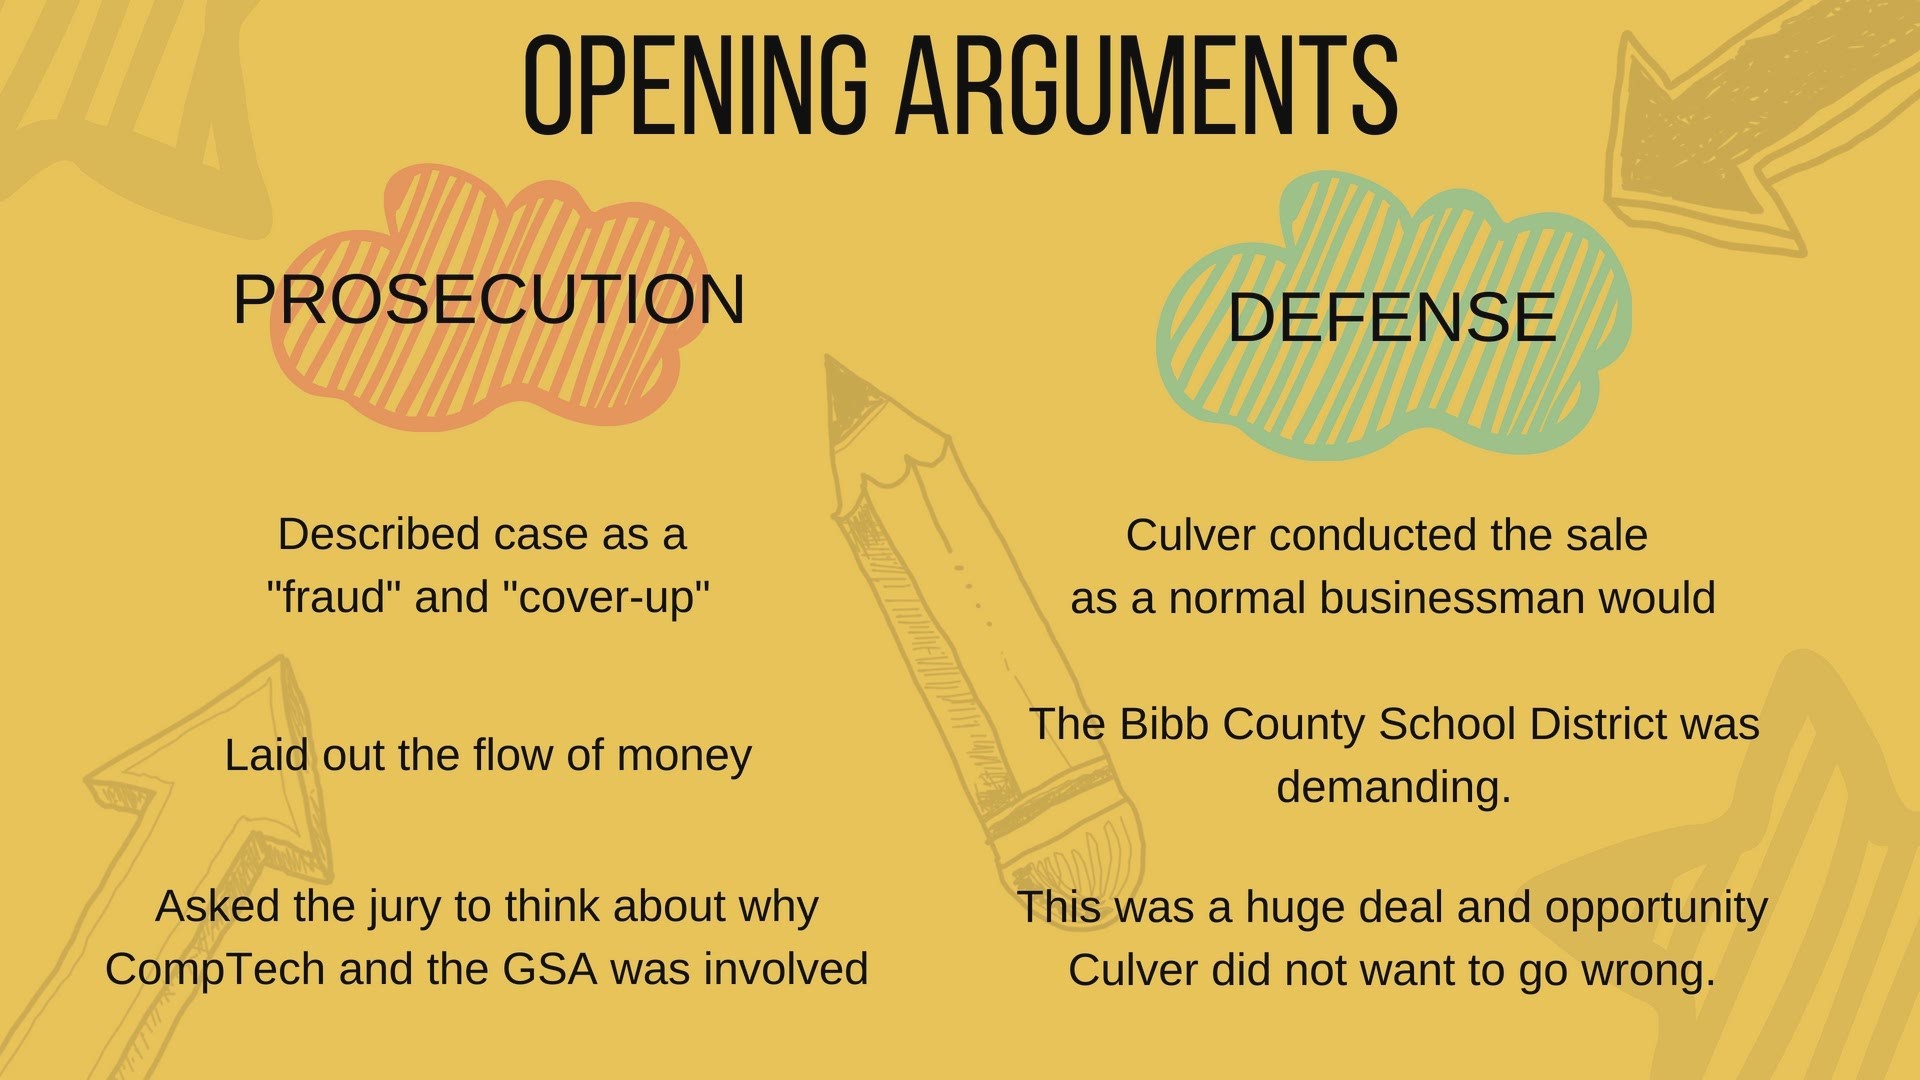 The Court Report: United States v. Culver